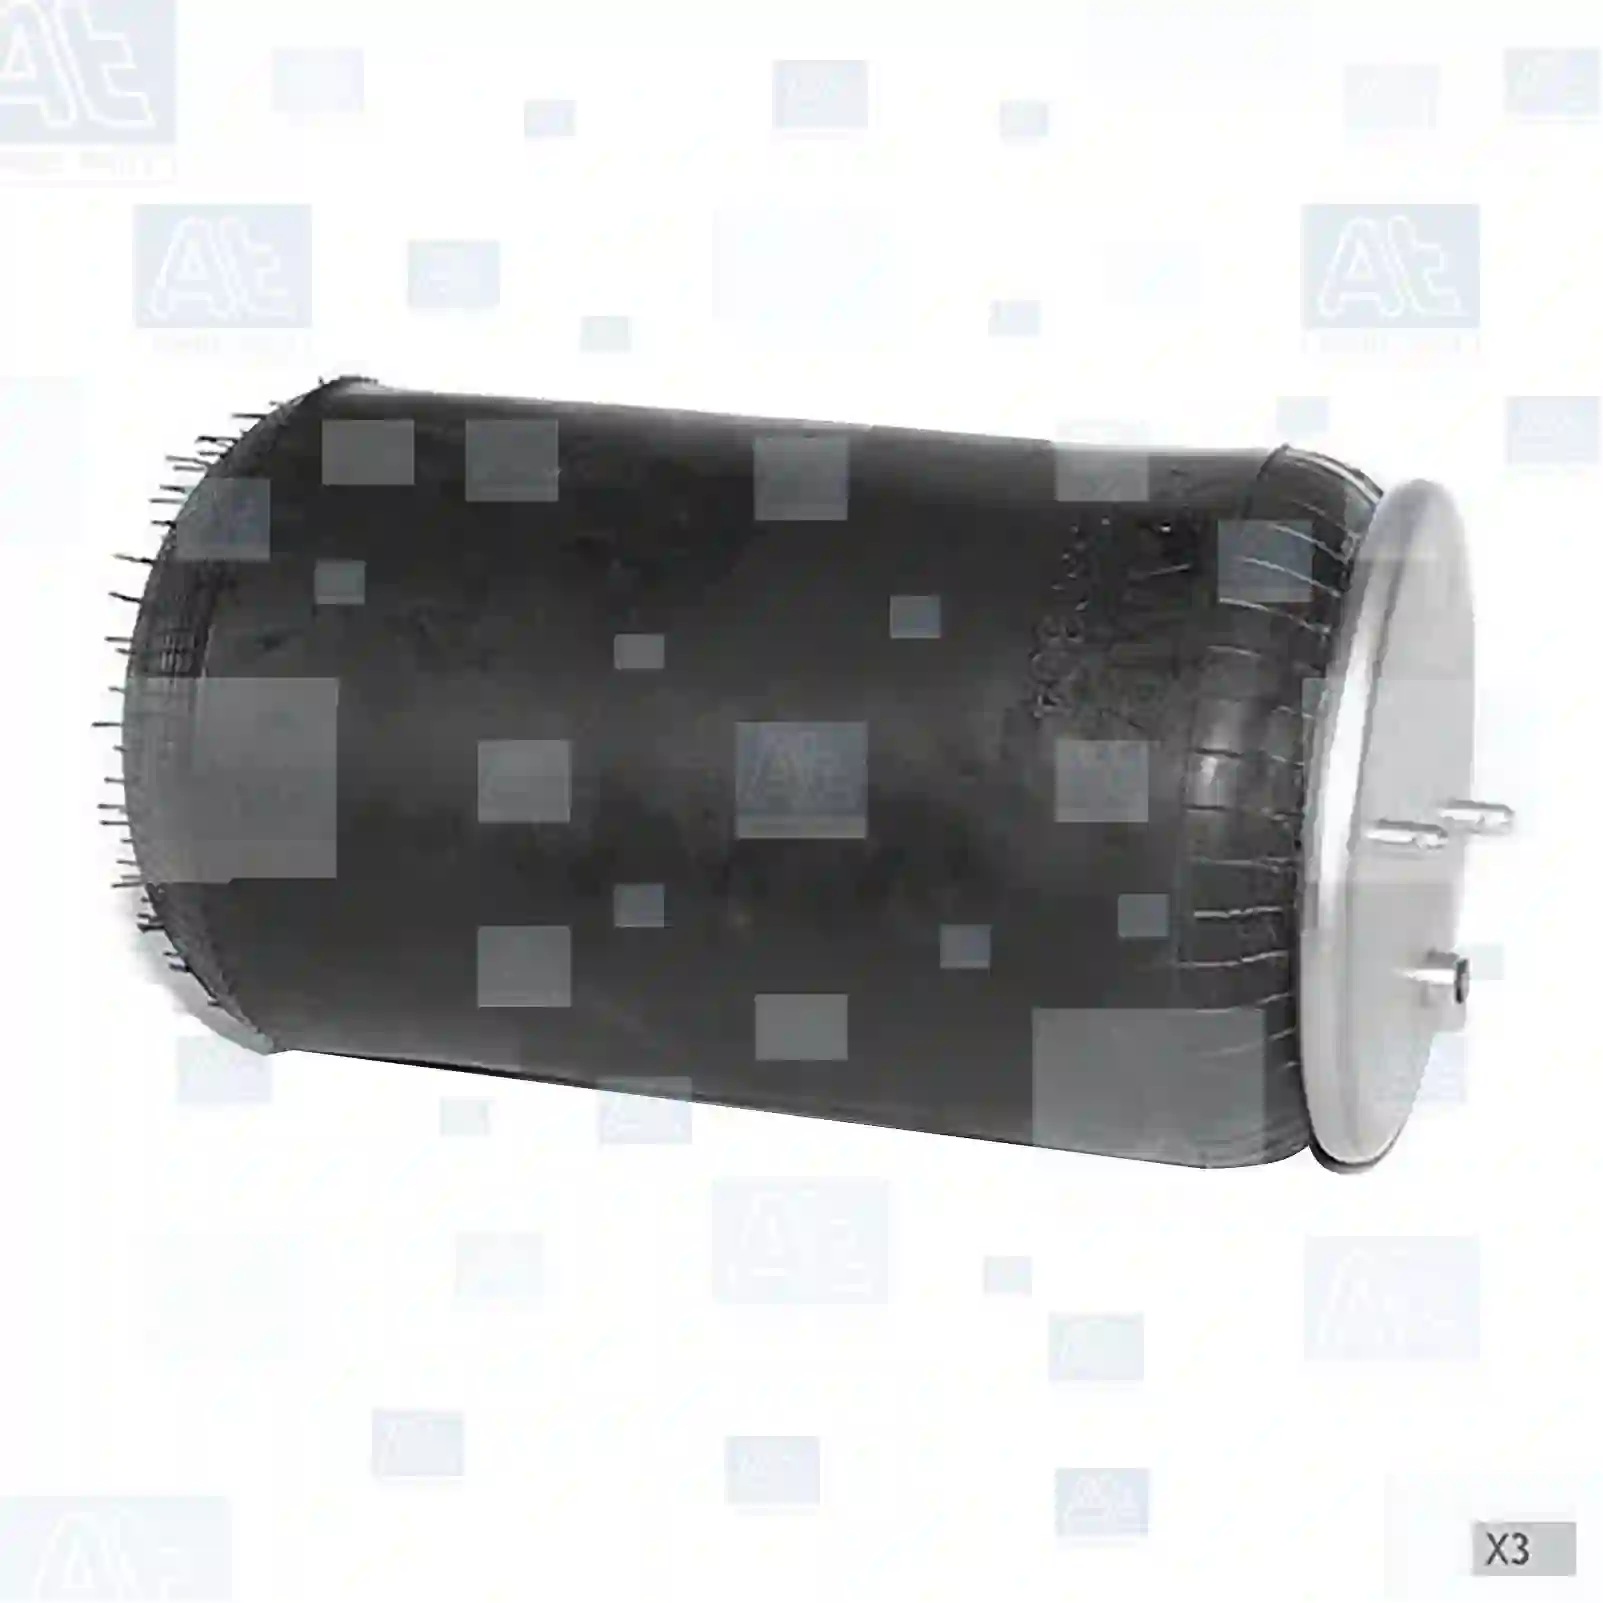 Mounting kit, air spring, at no 77730145, oem no: MLF7141S, MLF7142S, MLF7143S, MLF7146S, MLF7182S, MLF8182S, 1349708S, 1362143S, 1362145S, 1362147S, 1370743S, 1370744S, 1386198S, 1386199S, 1386200S, 1434506S, 1440301S, 1440302S, 1440303S, 1440304S, 1440305S, 1440306S, 1440307S, 1475106S, 1521114S, 470920S, 470921S, 470922S, 488264S, 488265S, 488266S, 492678S, 492680S, ZG41310-0008 At Spare Part | Engine, Accelerator Pedal, Camshaft, Connecting Rod, Crankcase, Crankshaft, Cylinder Head, Engine Suspension Mountings, Exhaust Manifold, Exhaust Gas Recirculation, Filter Kits, Flywheel Housing, General Overhaul Kits, Engine, Intake Manifold, Oil Cleaner, Oil Cooler, Oil Filter, Oil Pump, Oil Sump, Piston & Liner, Sensor & Switch, Timing Case, Turbocharger, Cooling System, Belt Tensioner, Coolant Filter, Coolant Pipe, Corrosion Prevention Agent, Drive, Expansion Tank, Fan, Intercooler, Monitors & Gauges, Radiator, Thermostat, V-Belt / Timing belt, Water Pump, Fuel System, Electronical Injector Unit, Feed Pump, Fuel Filter, cpl., Fuel Gauge Sender,  Fuel Line, Fuel Pump, Fuel Tank, Injection Line Kit, Injection Pump, Exhaust System, Clutch & Pedal, Gearbox, Propeller Shaft, Axles, Brake System, Hubs & Wheels, Suspension, Leaf Spring, Universal Parts / Accessories, Steering, Electrical System, Cabin Mounting kit, air spring, at no 77730145, oem no: MLF7141S, MLF7142S, MLF7143S, MLF7146S, MLF7182S, MLF8182S, 1349708S, 1362143S, 1362145S, 1362147S, 1370743S, 1370744S, 1386198S, 1386199S, 1386200S, 1434506S, 1440301S, 1440302S, 1440303S, 1440304S, 1440305S, 1440306S, 1440307S, 1475106S, 1521114S, 470920S, 470921S, 470922S, 488264S, 488265S, 488266S, 492678S, 492680S, ZG41310-0008 At Spare Part | Engine, Accelerator Pedal, Camshaft, Connecting Rod, Crankcase, Crankshaft, Cylinder Head, Engine Suspension Mountings, Exhaust Manifold, Exhaust Gas Recirculation, Filter Kits, Flywheel Housing, General Overhaul Kits, Engine, Intake Manifold, Oil Cleaner, Oil Cooler, Oil Filter, Oil Pump, Oil Sump, Piston & Liner, Sensor & Switch, Timing Case, Turbocharger, Cooling System, Belt Tensioner, Coolant Filter, Coolant Pipe, Corrosion Prevention Agent, Drive, Expansion Tank, Fan, Intercooler, Monitors & Gauges, Radiator, Thermostat, V-Belt / Timing belt, Water Pump, Fuel System, Electronical Injector Unit, Feed Pump, Fuel Filter, cpl., Fuel Gauge Sender,  Fuel Line, Fuel Pump, Fuel Tank, Injection Line Kit, Injection Pump, Exhaust System, Clutch & Pedal, Gearbox, Propeller Shaft, Axles, Brake System, Hubs & Wheels, Suspension, Leaf Spring, Universal Parts / Accessories, Steering, Electrical System, Cabin